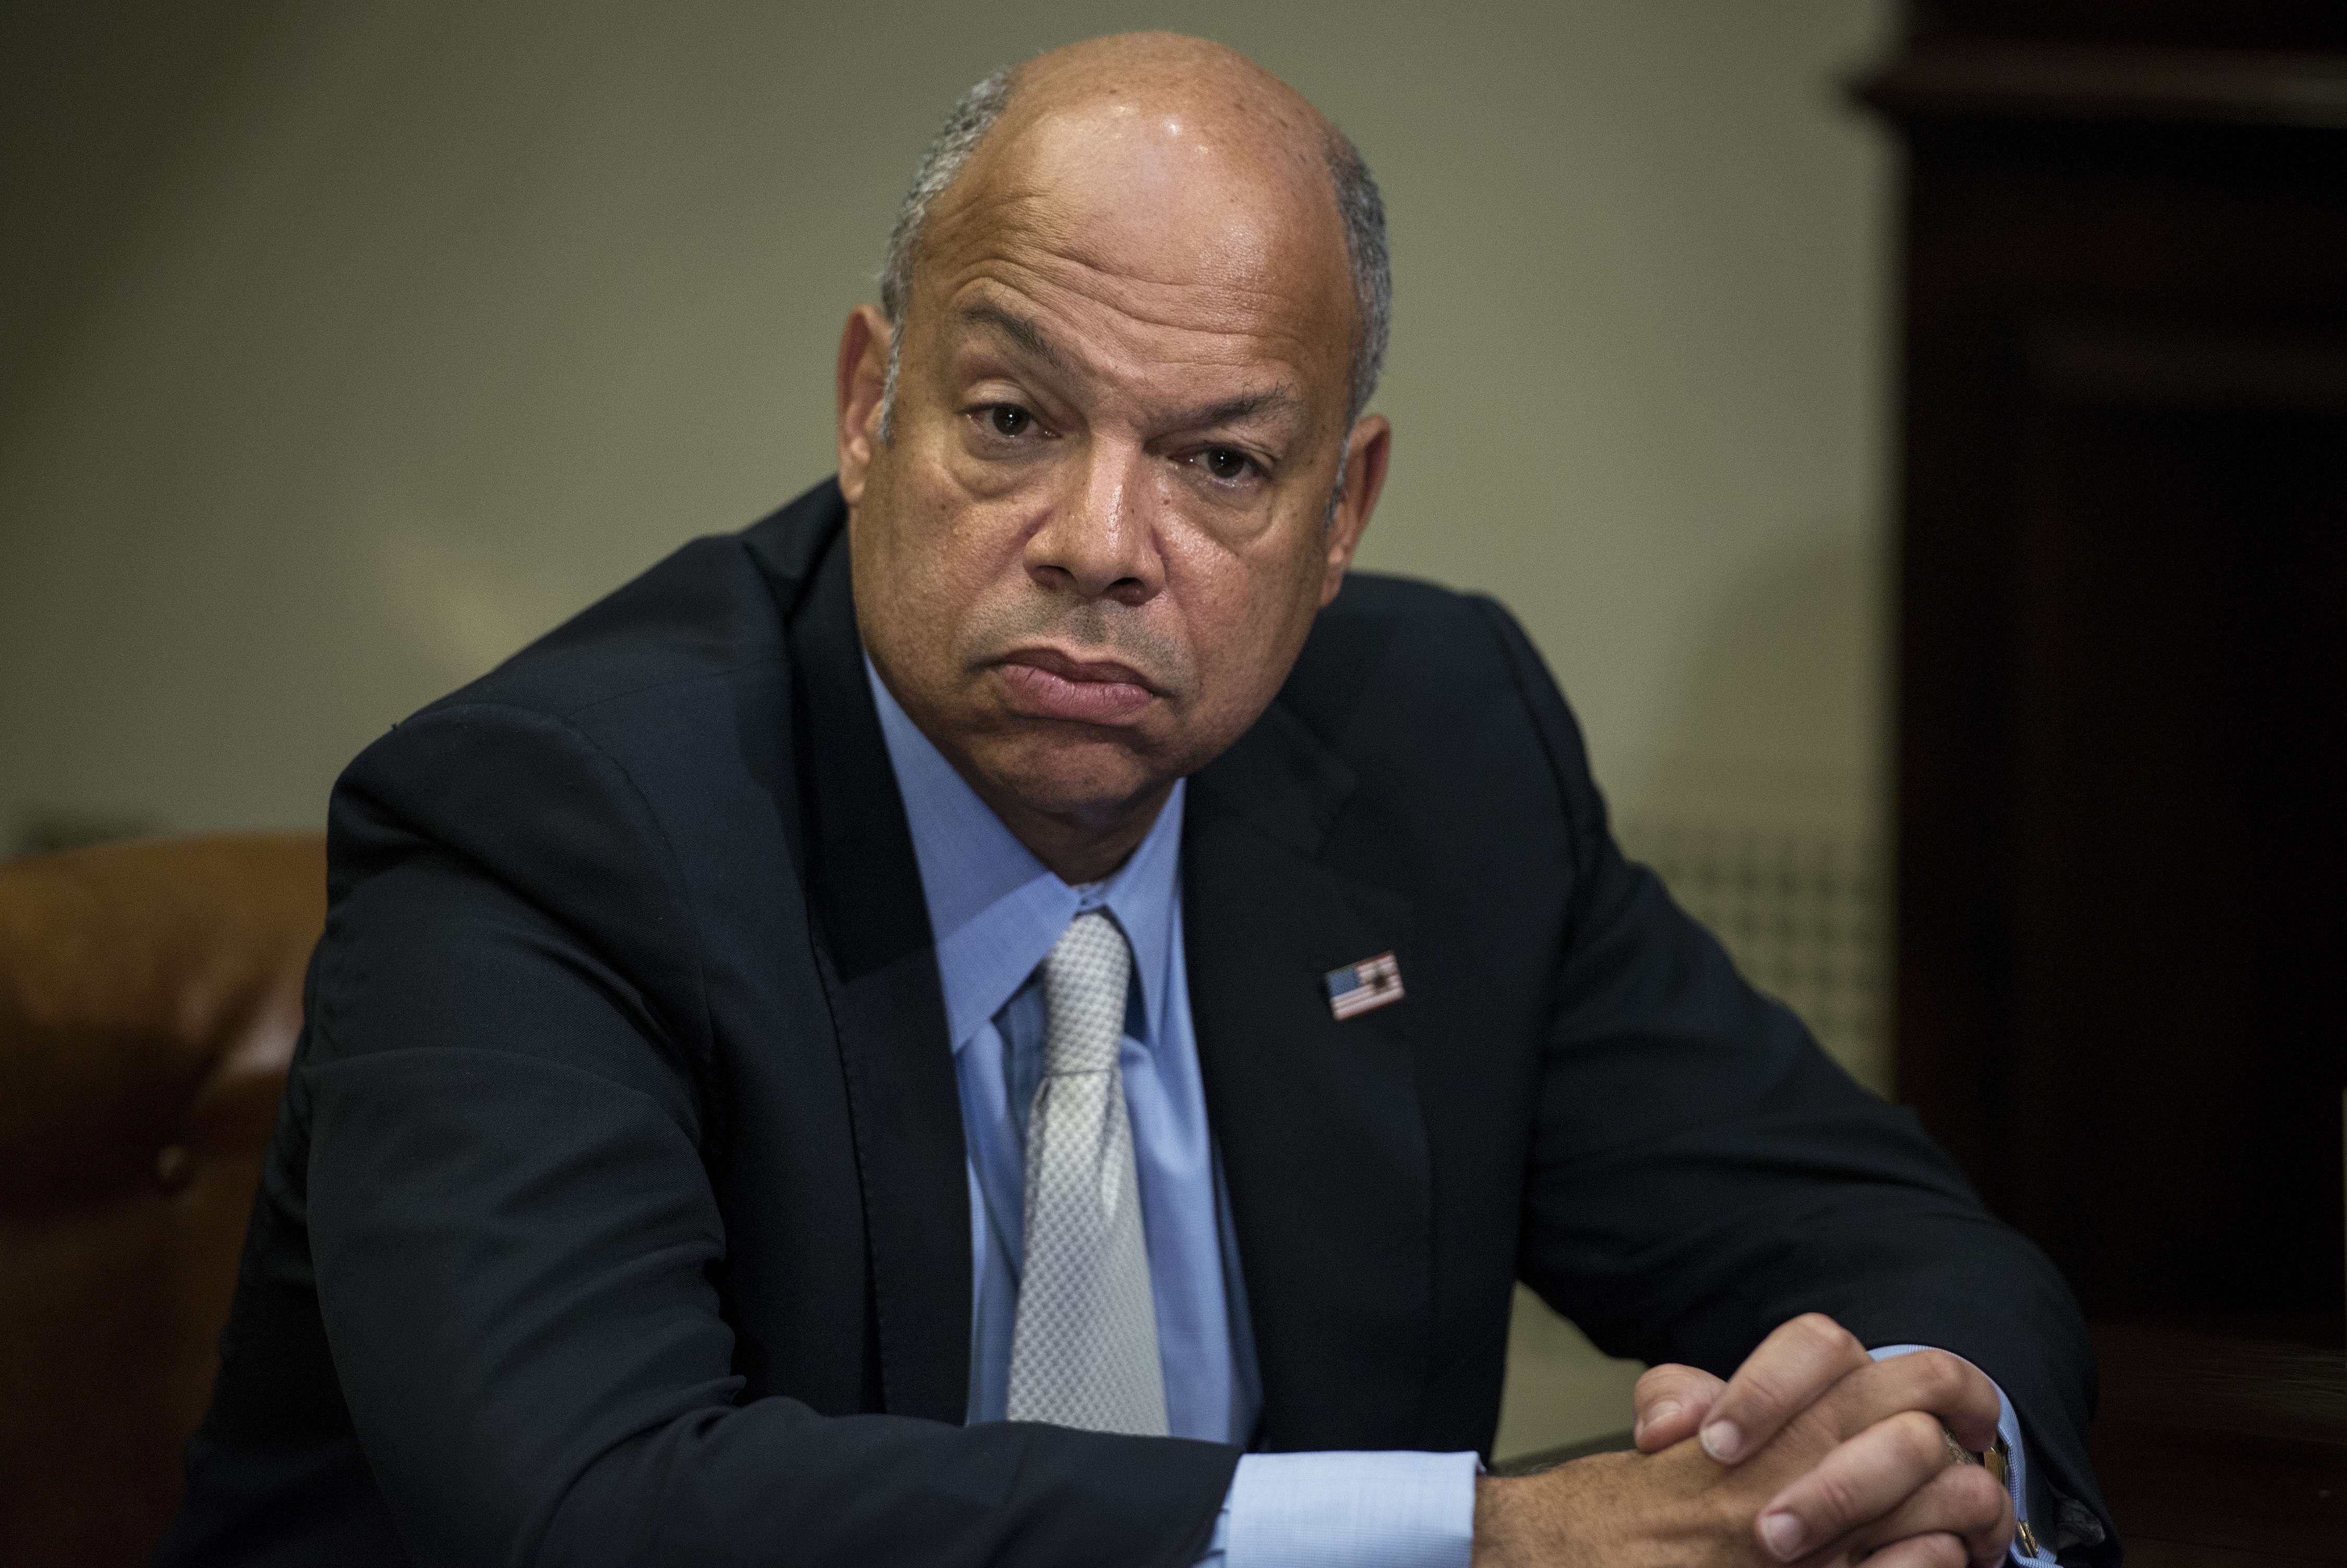 US Secretary of Homeland Security Jeh Johnson listens while US President Barack Obama makes a statement to the press after a meeting in the Roosevelt Room of the White House on Oct. 6, 2014 in Washington, DC.